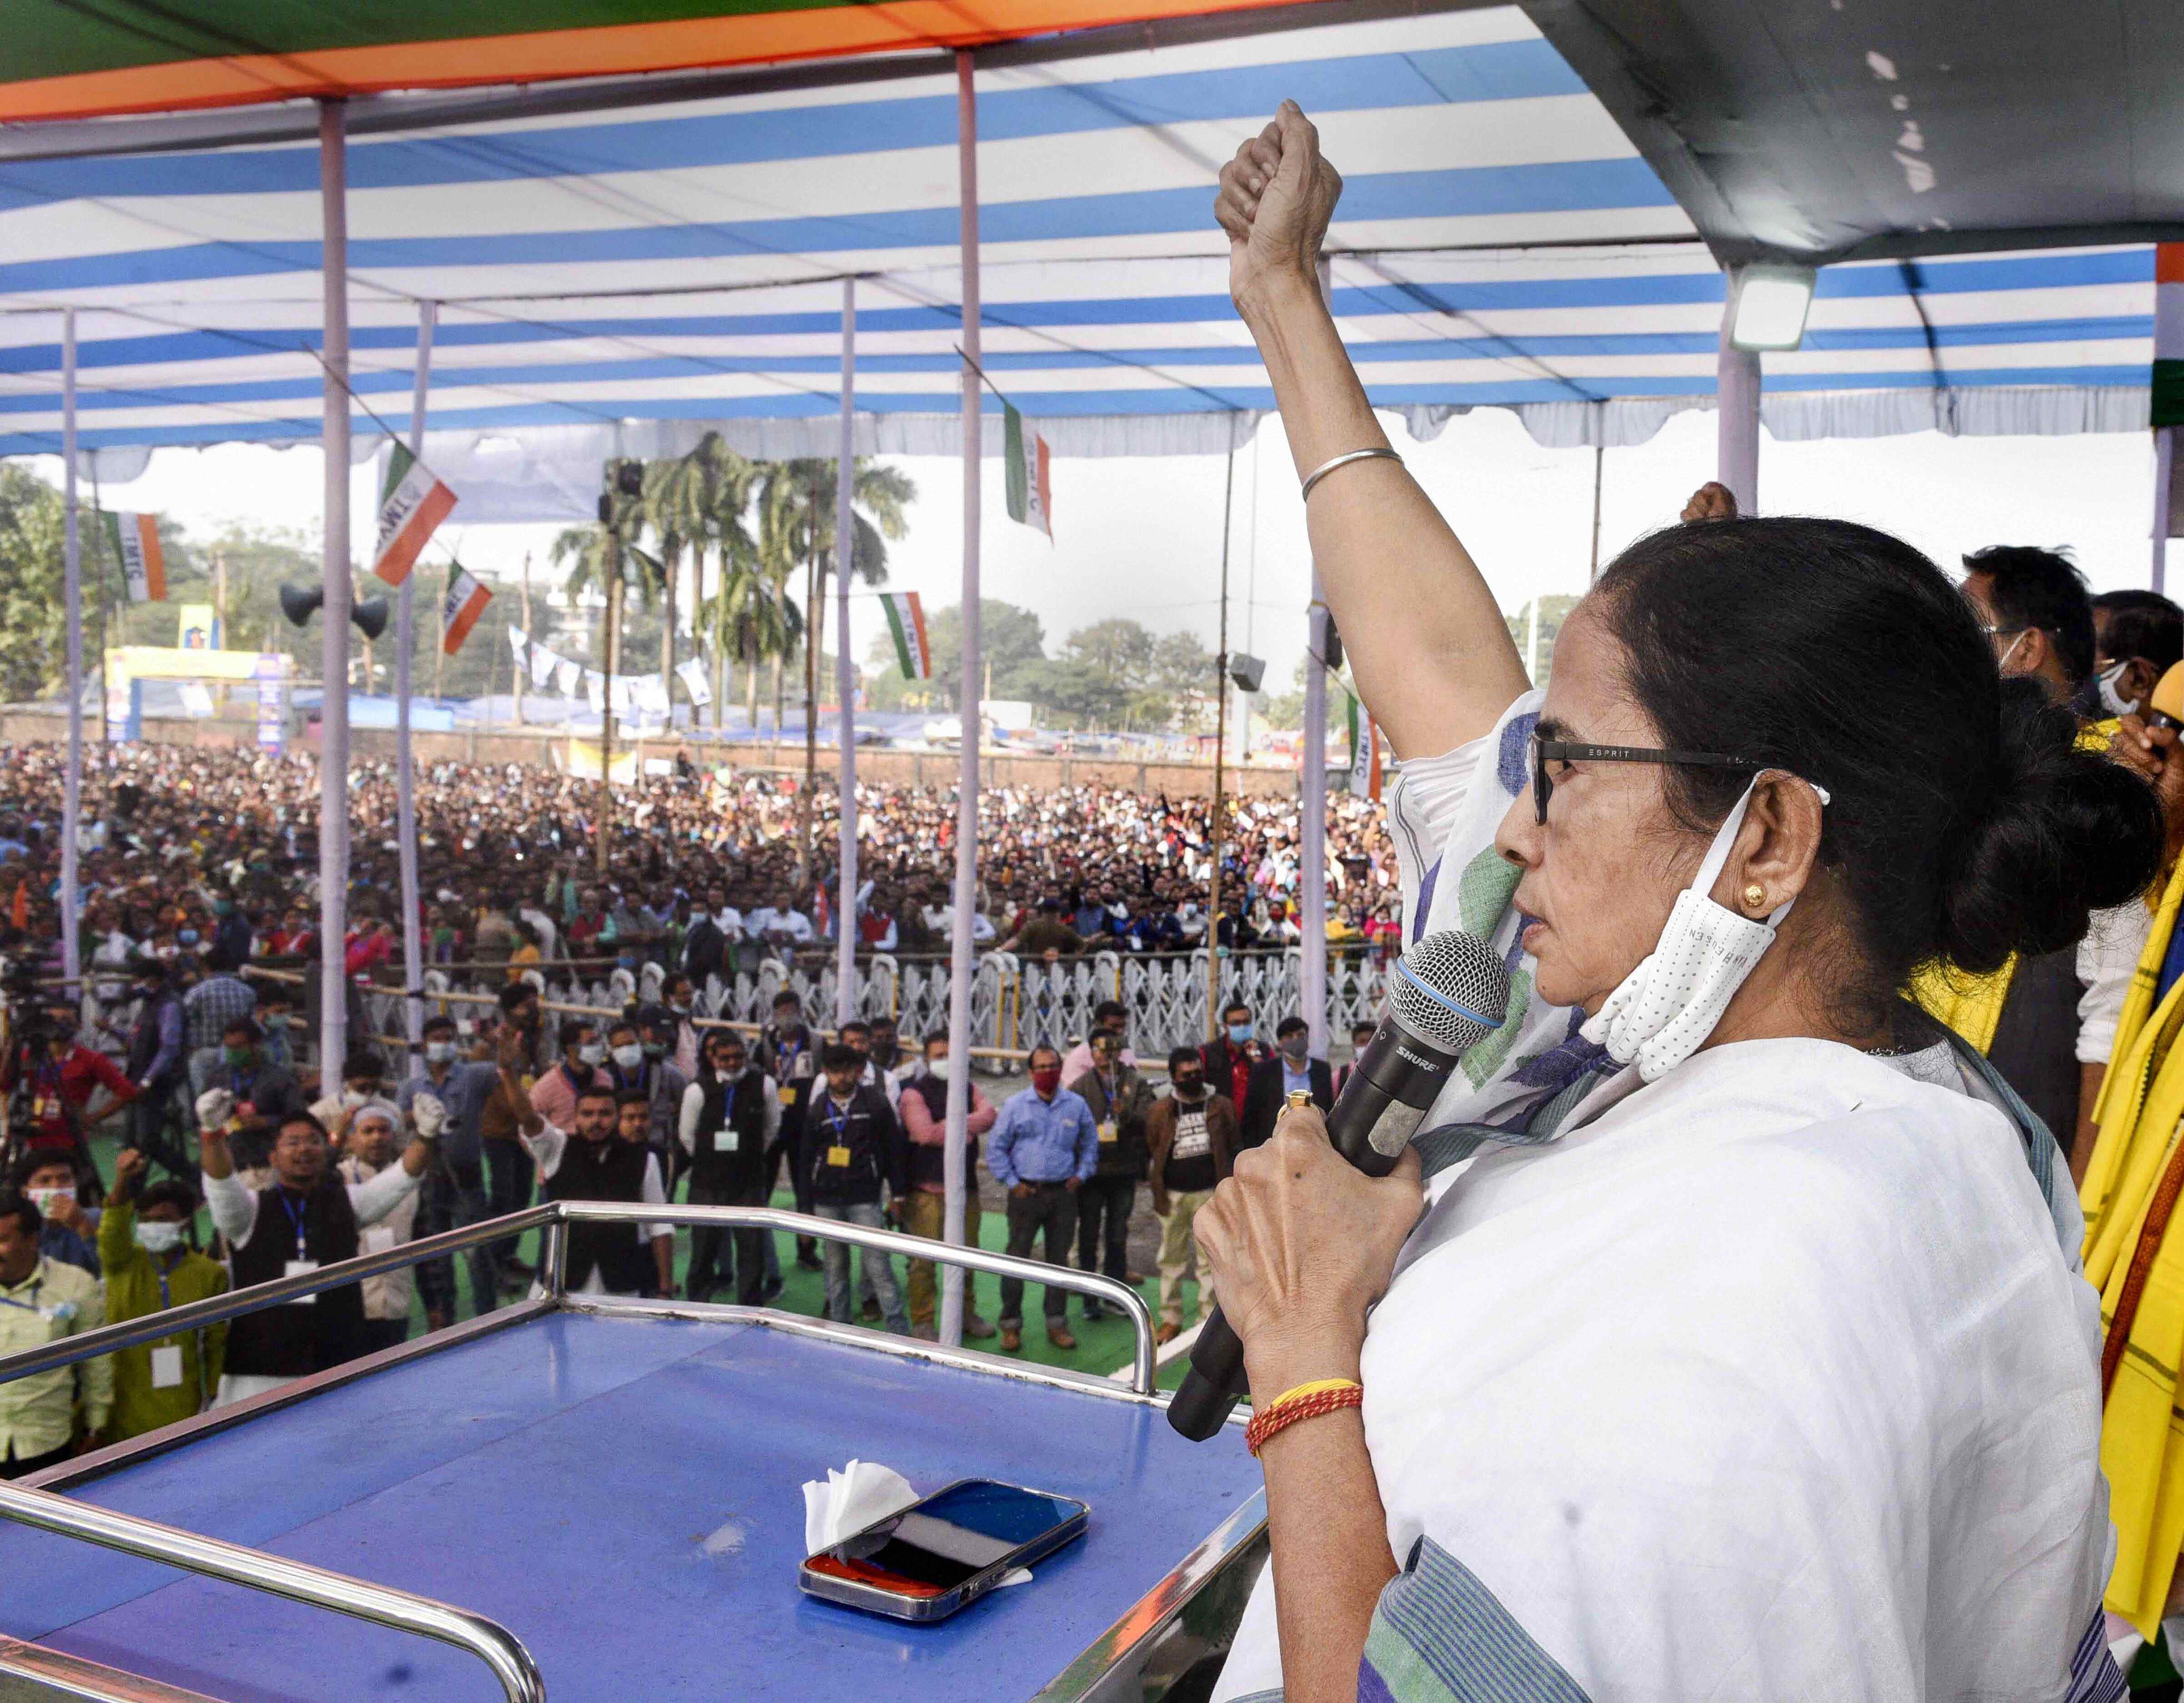 Sunset on BJP has started from Goa, UP, Punjab: Mamata